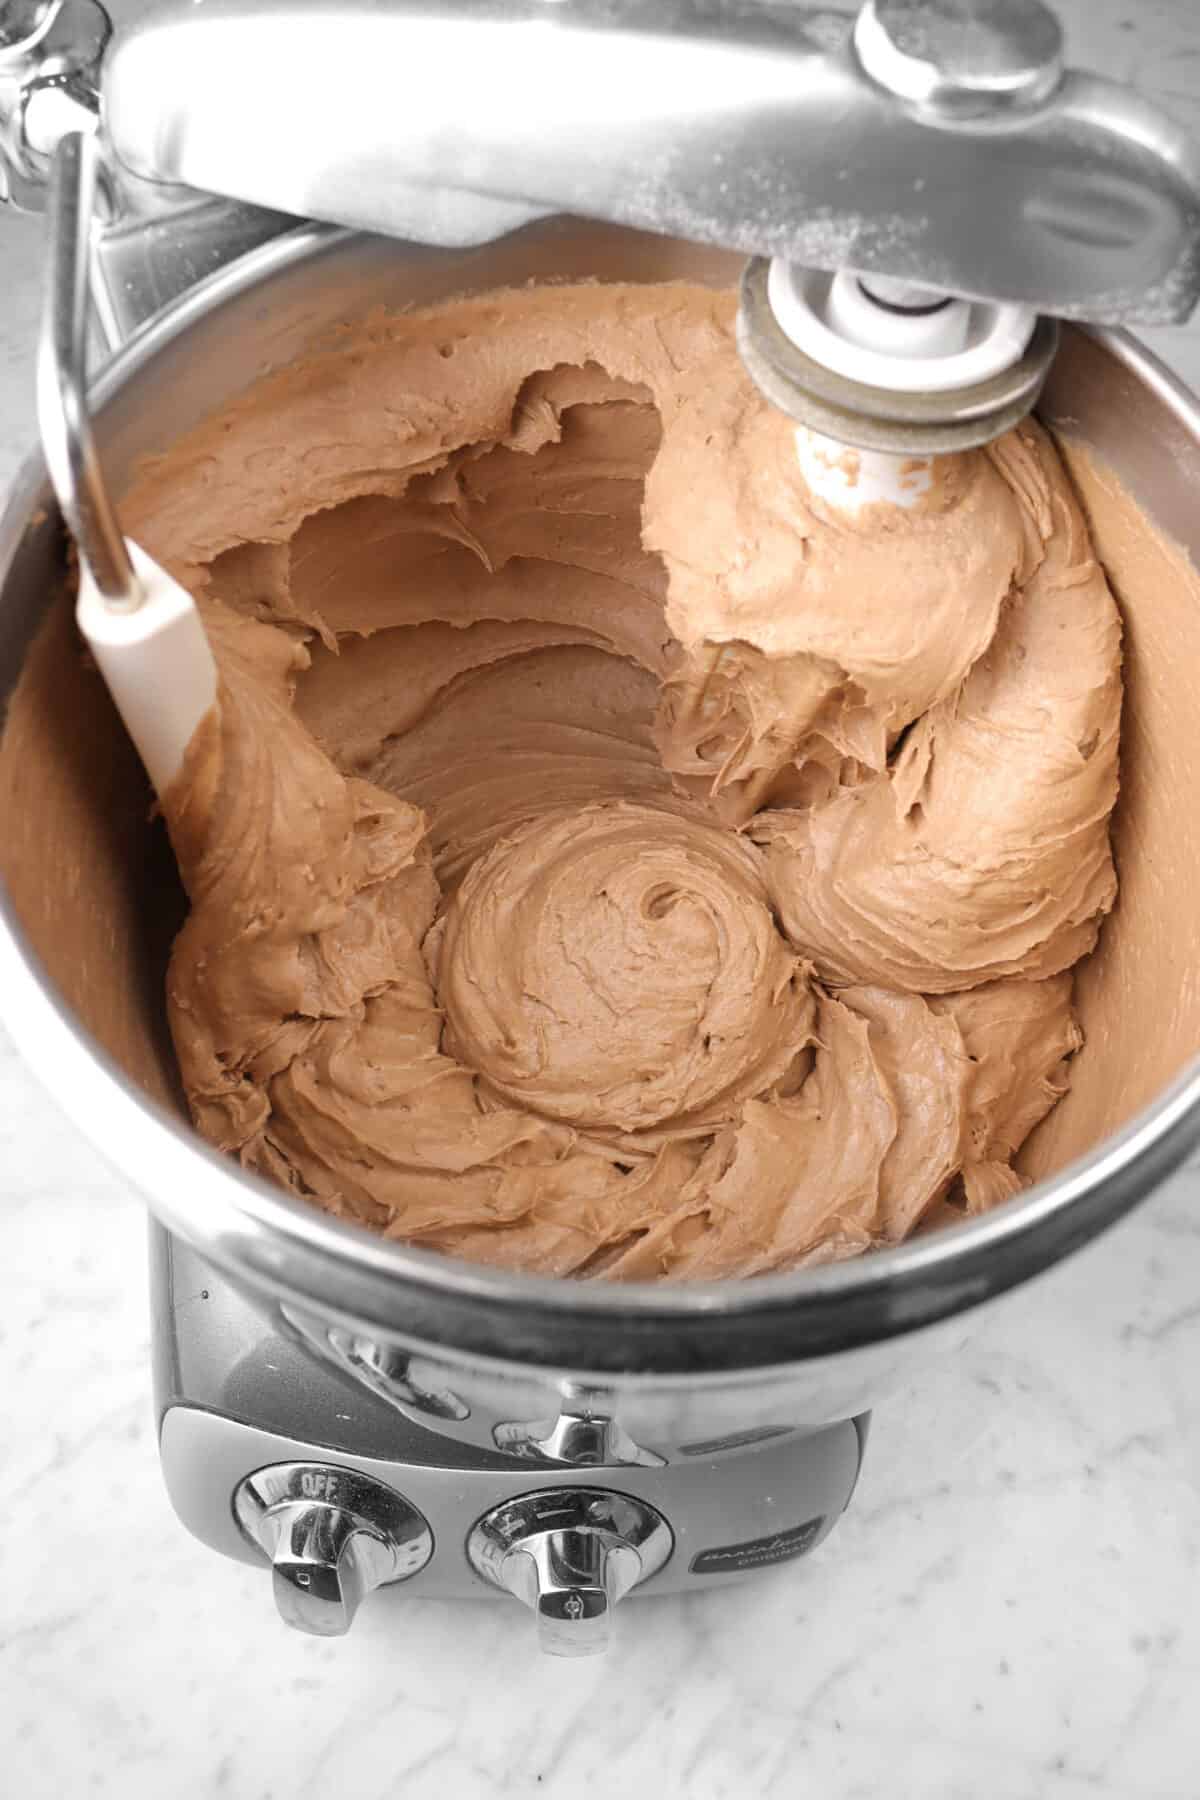 cake batter in a mixer bowl